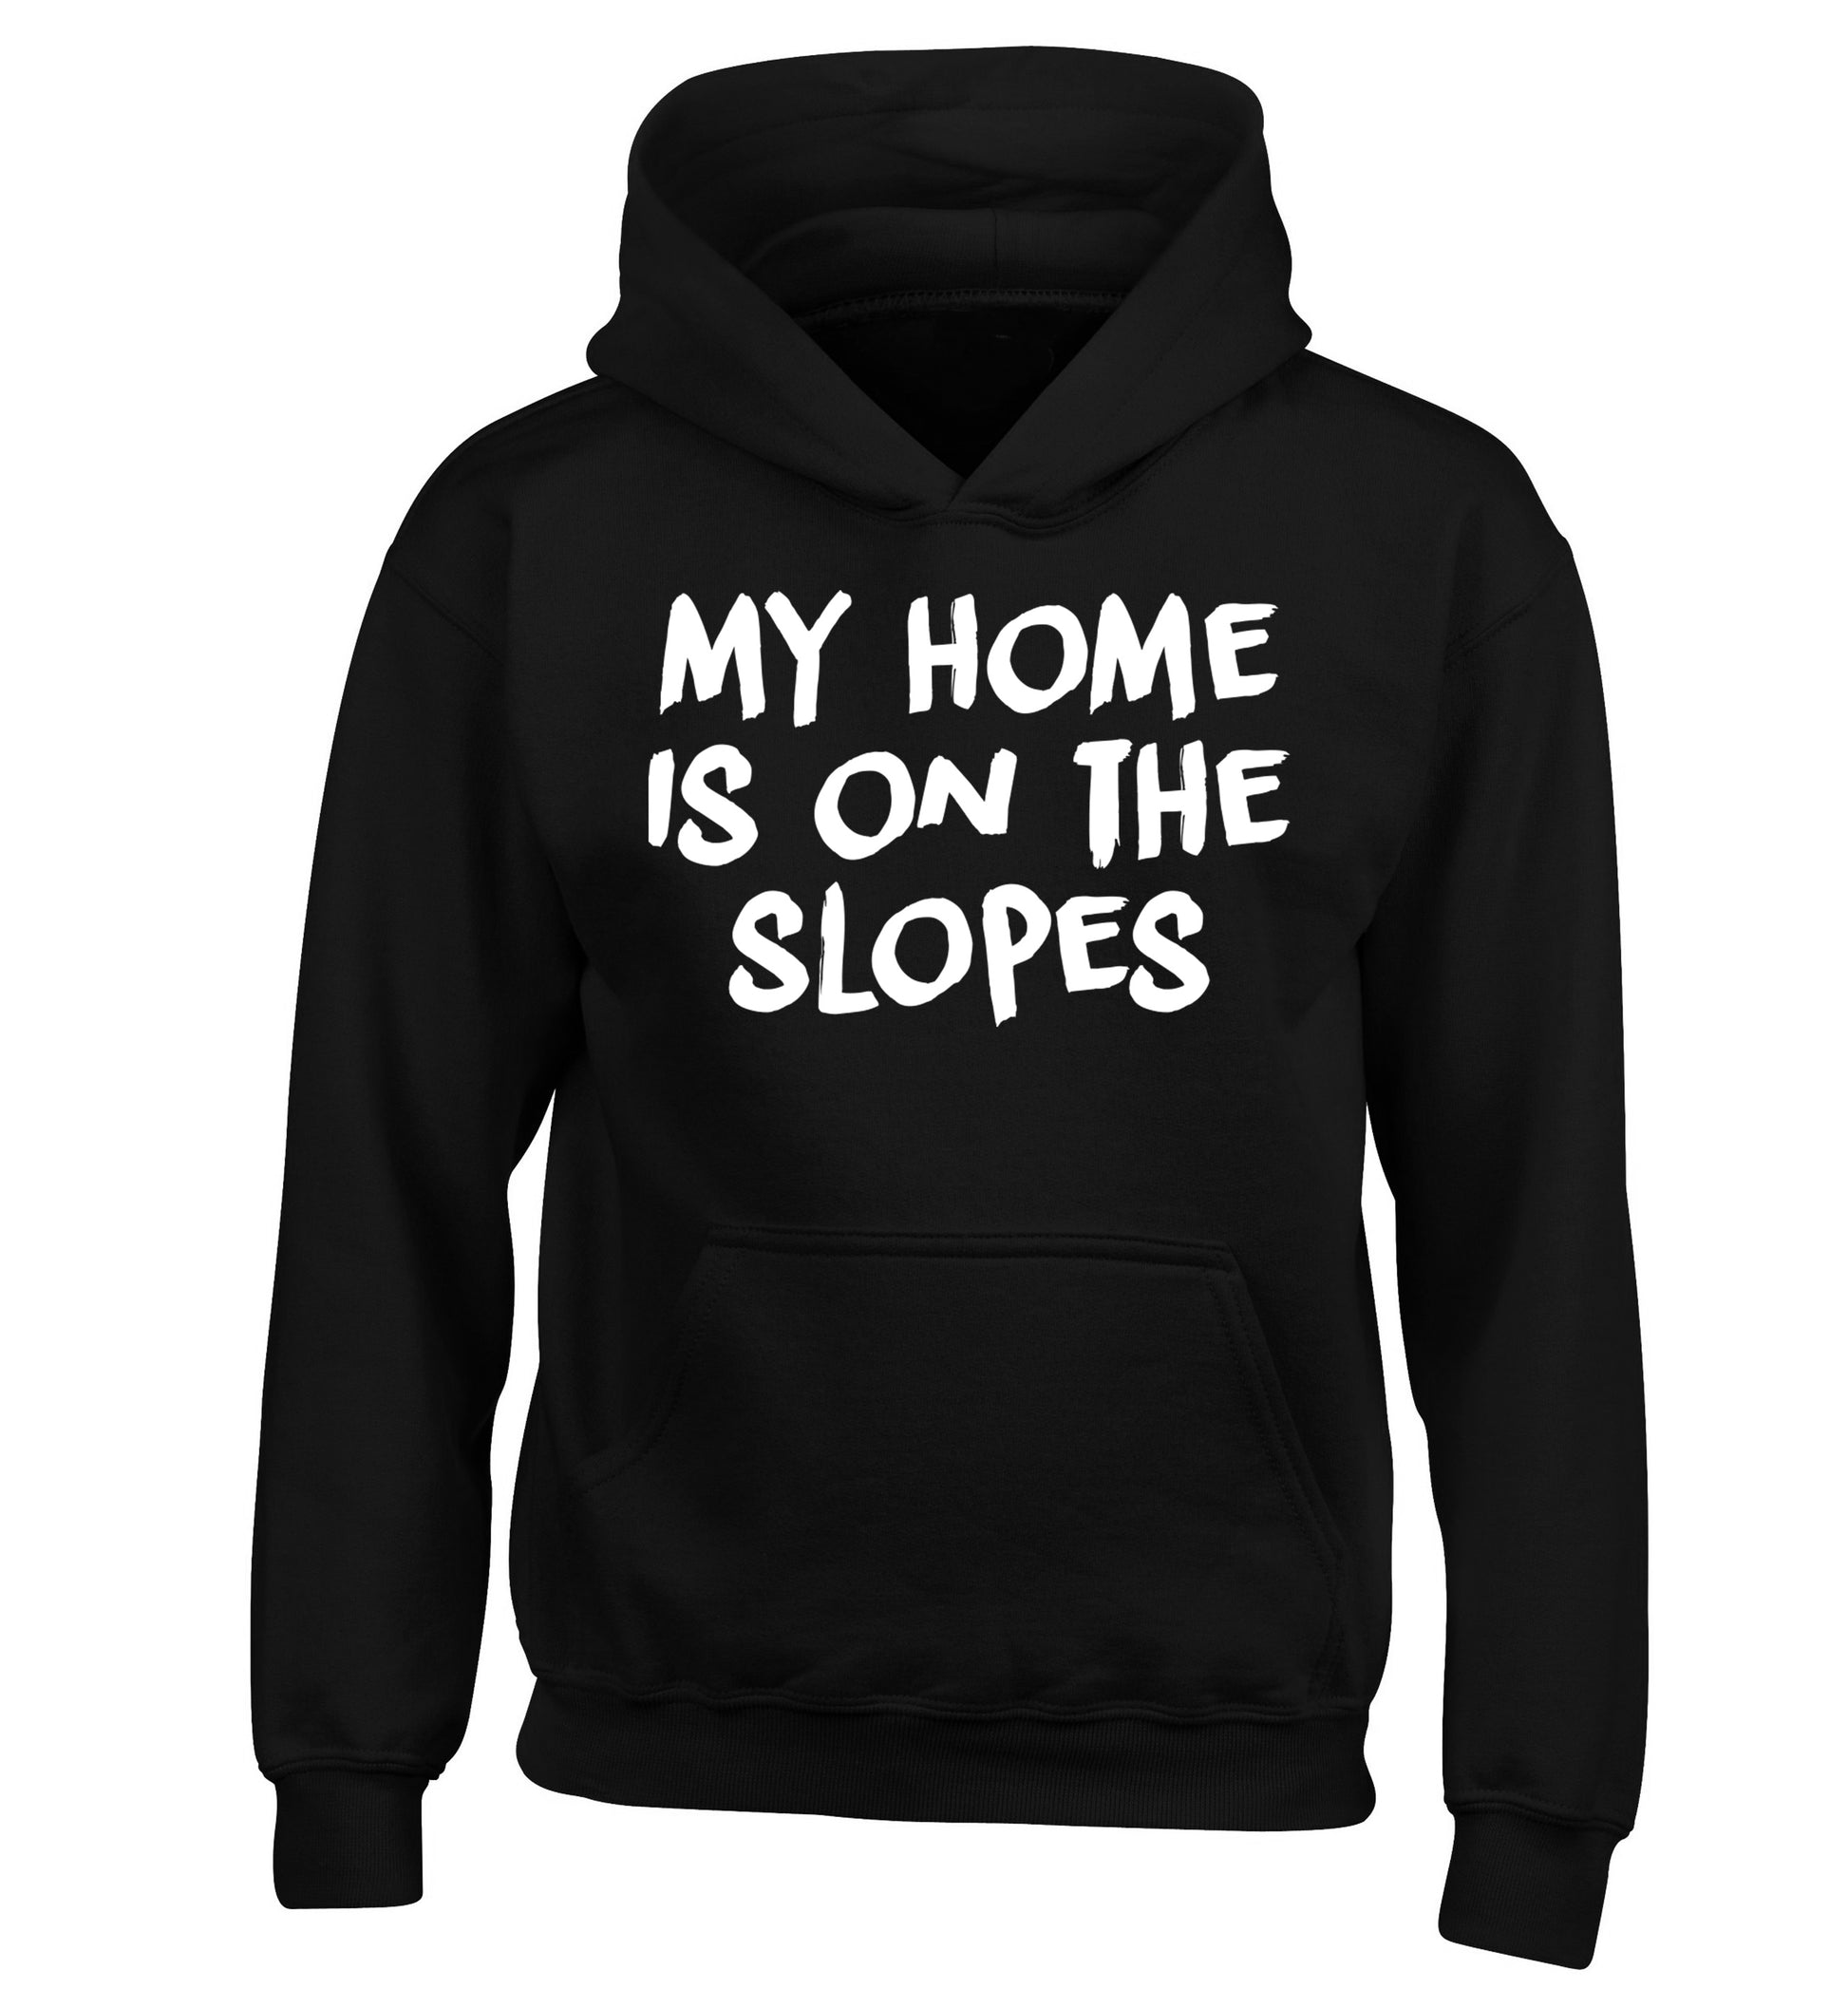 My home is on the slopes children's black hoodie 12-14 Years